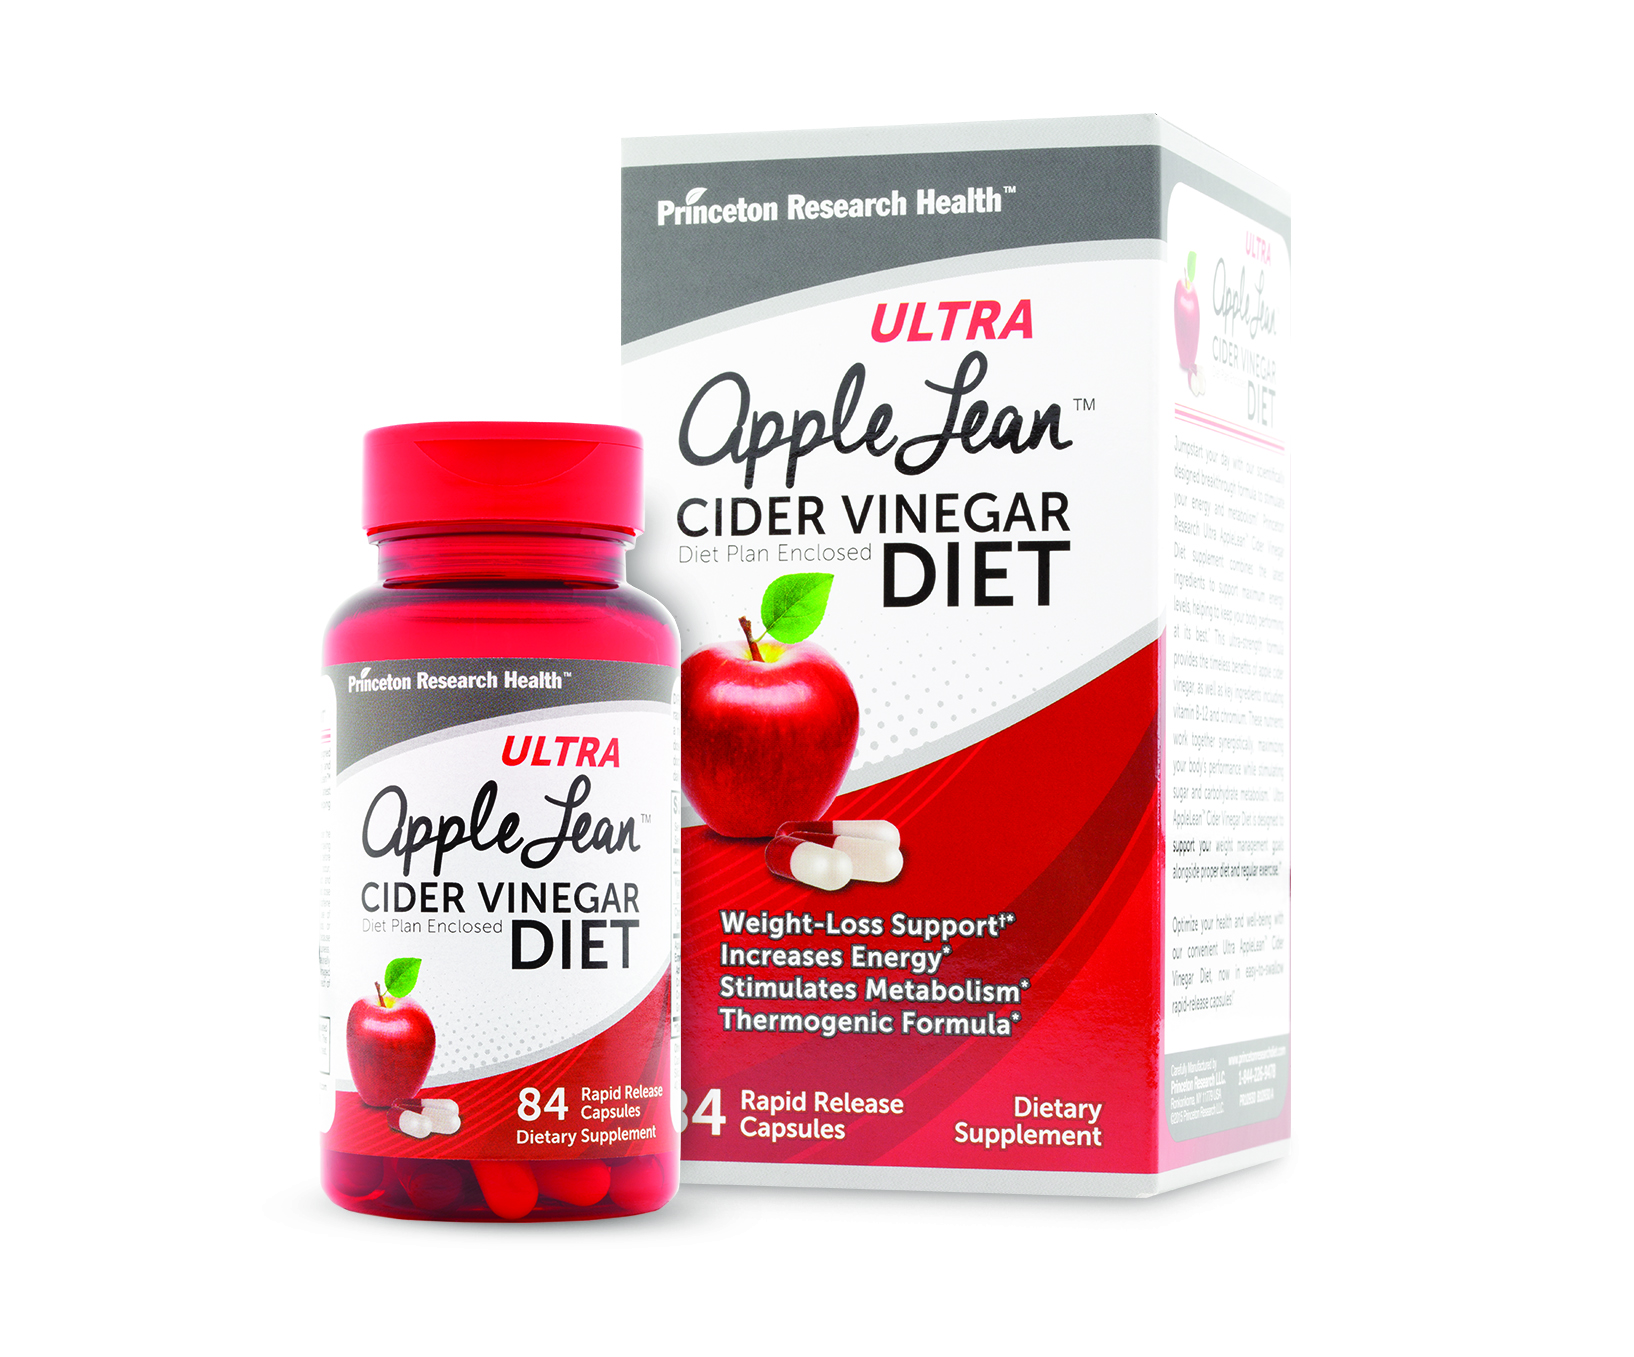 Ultra AppleLean™ Cider Vinegar diet supplements, now in easy-to-swallow rapid-release capsules by Piping Rock Health Products